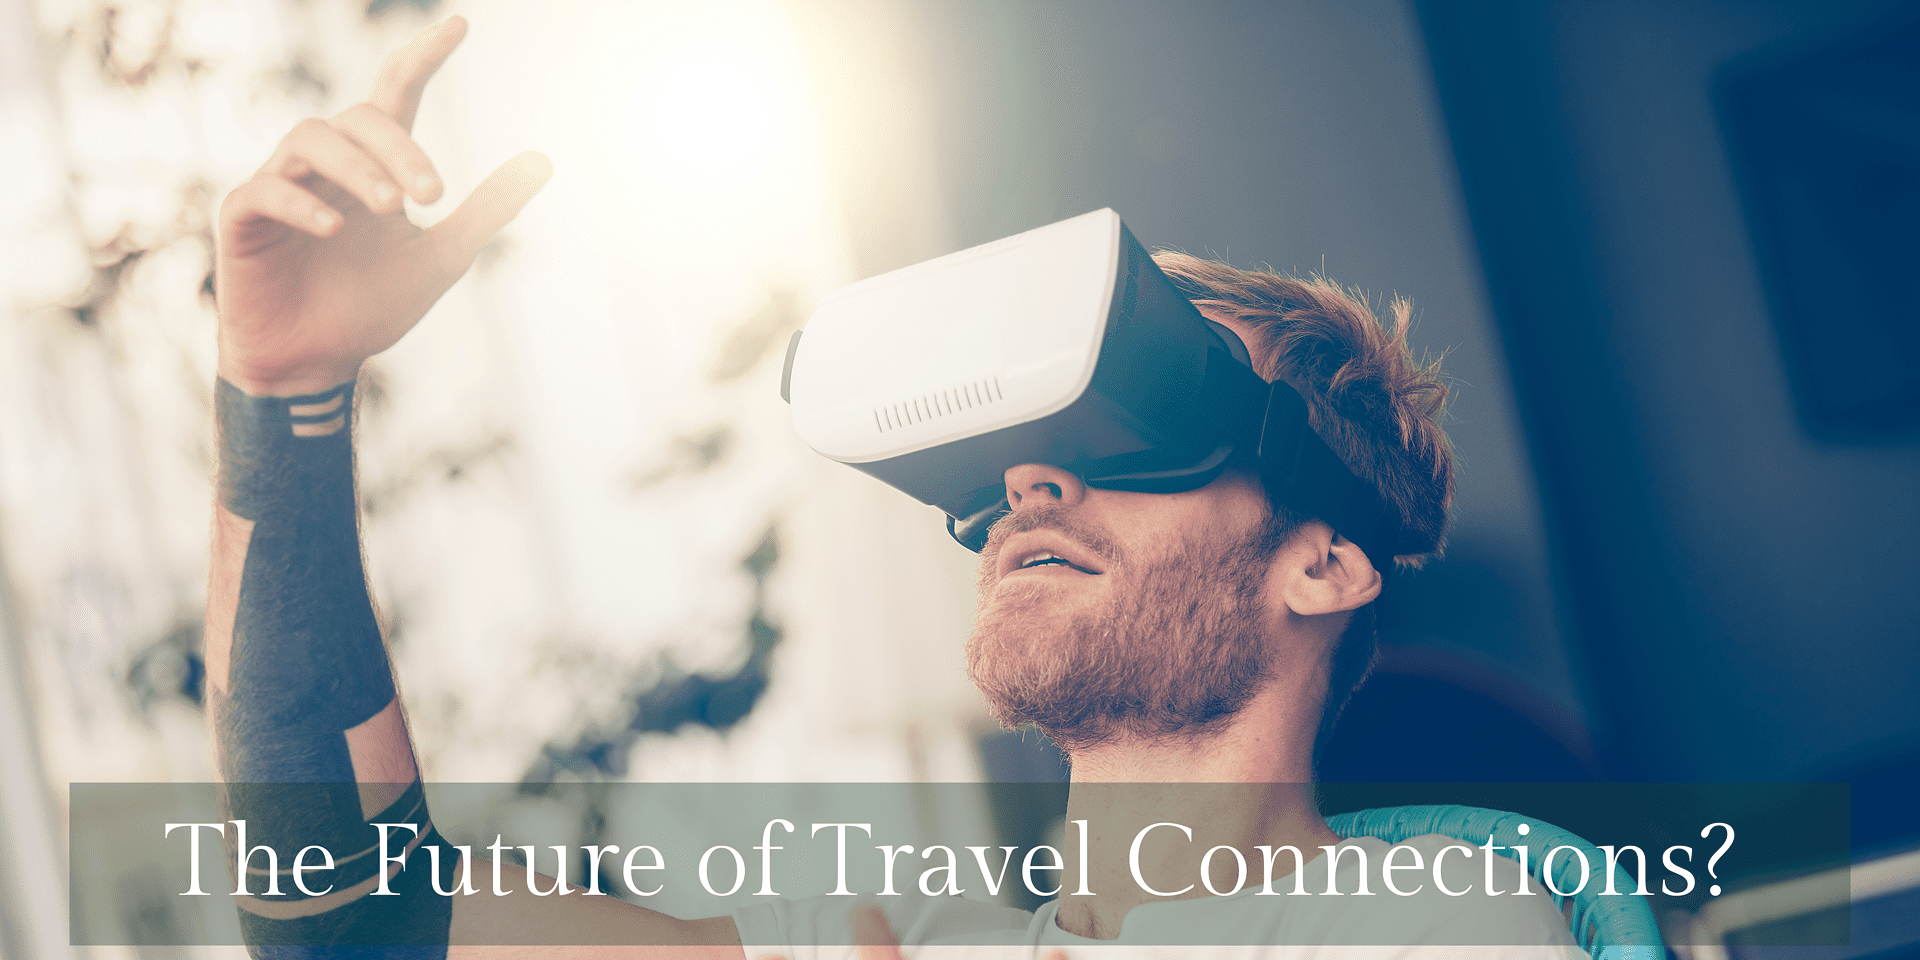 The future of travel connections and tech in travel